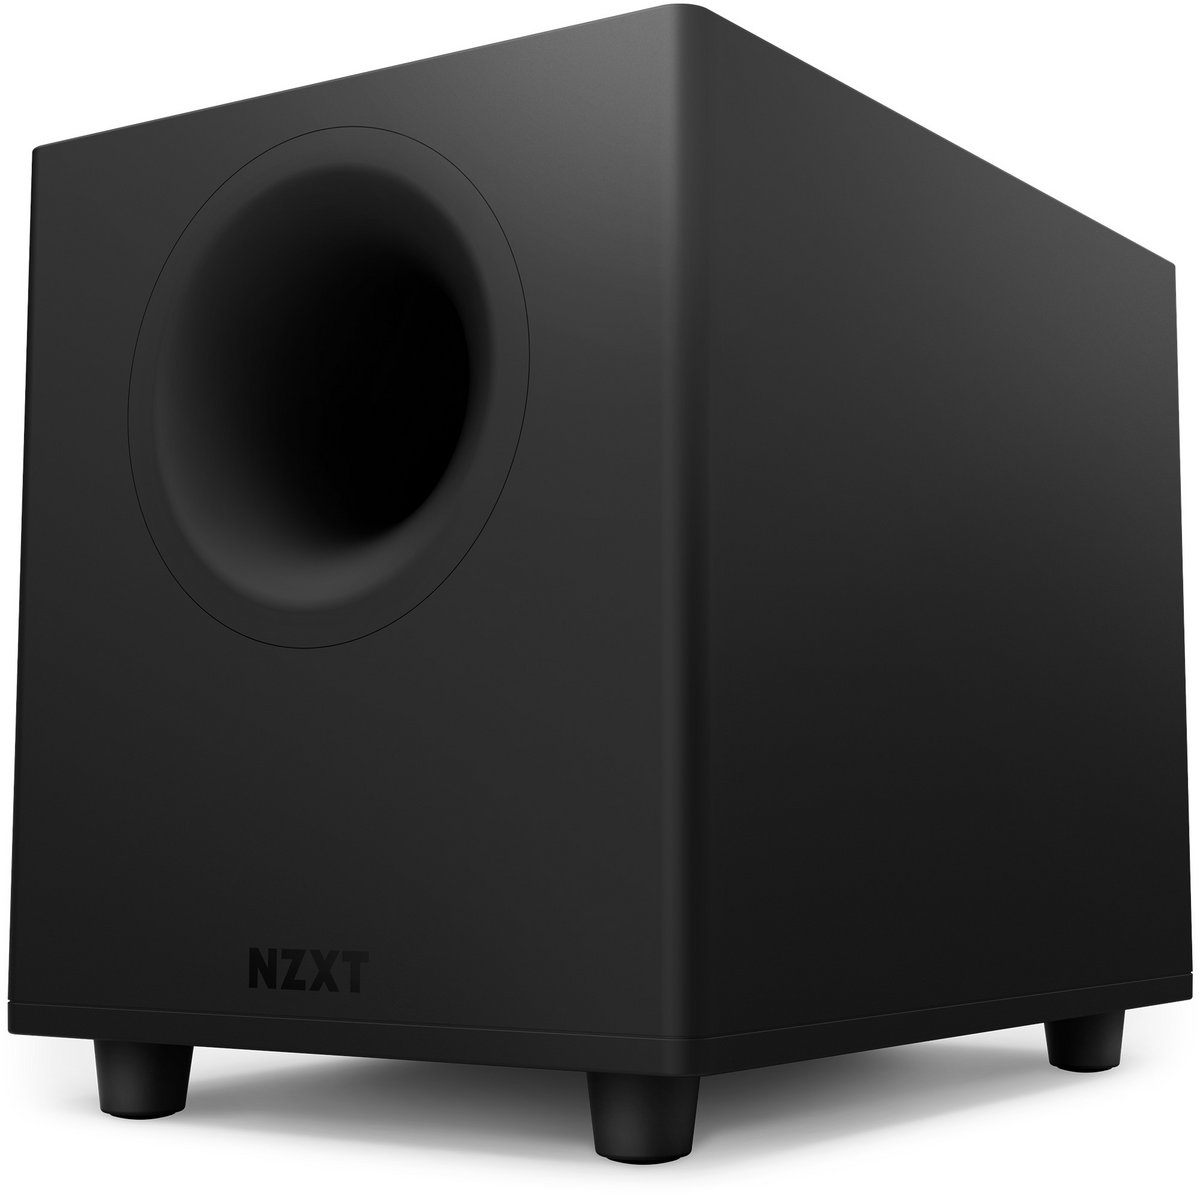 Système audio NZXT Relay